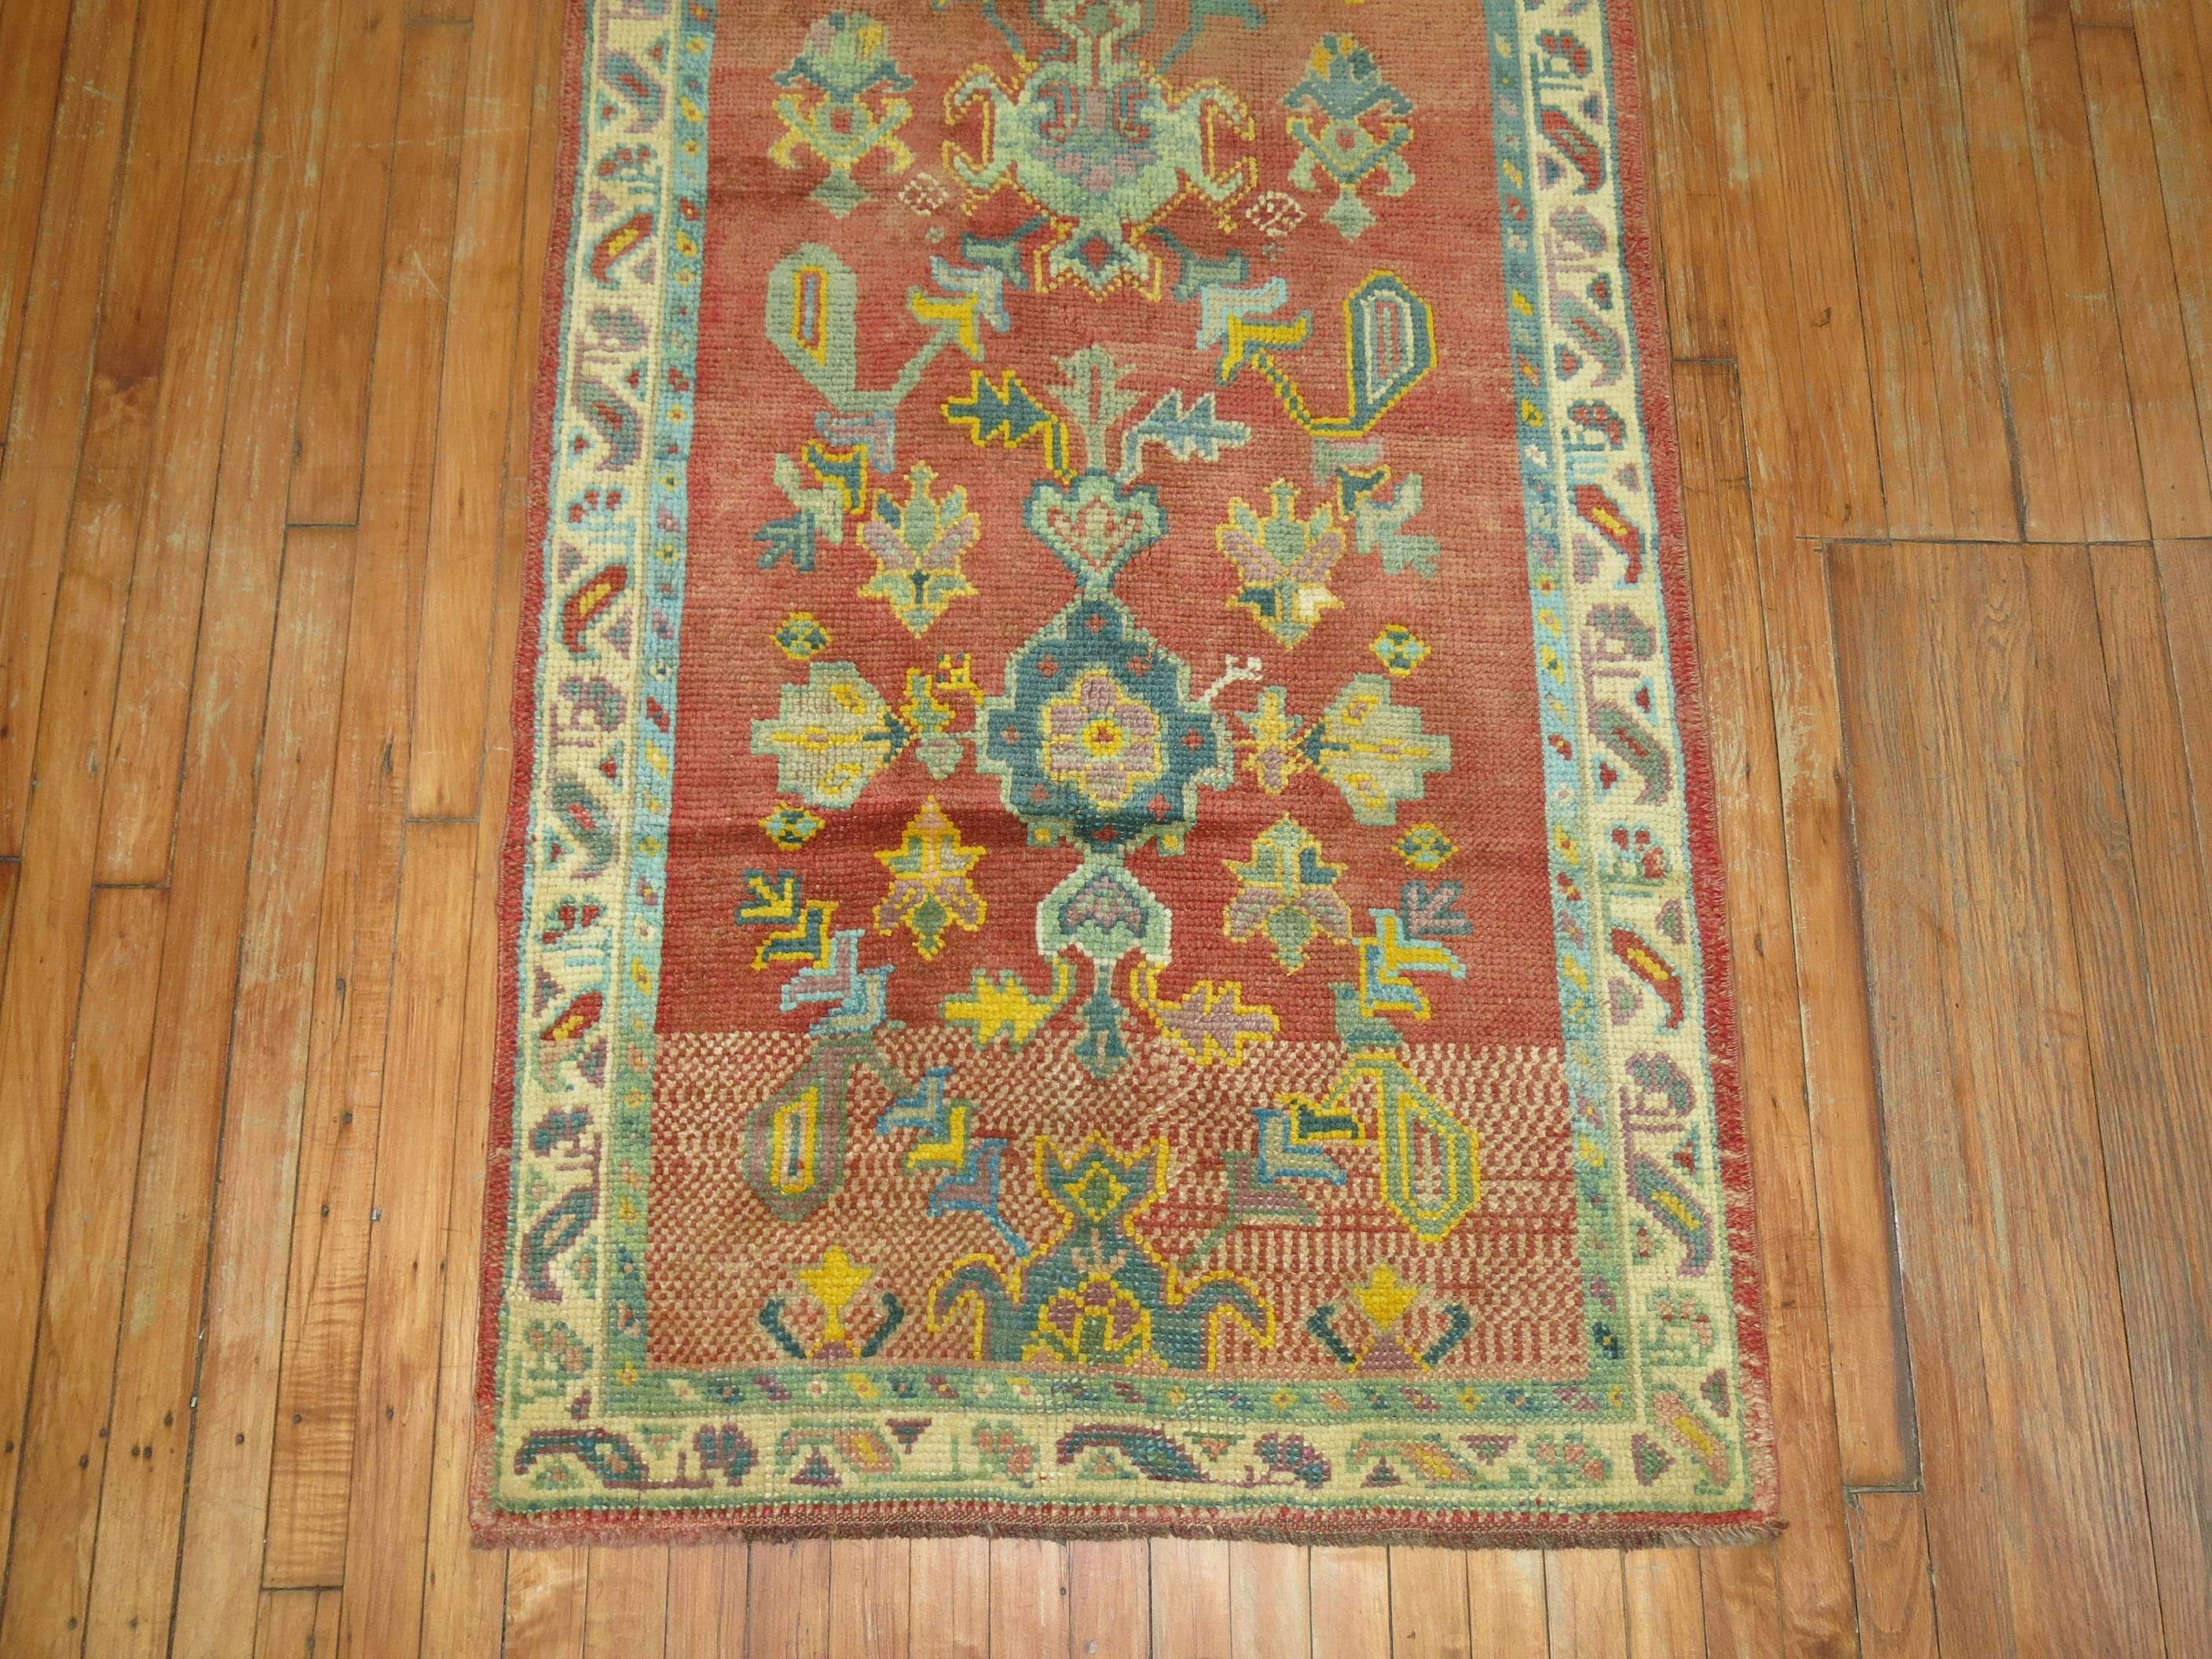 Spanish Colonial Antique Turkish Oushak Runner For Sale